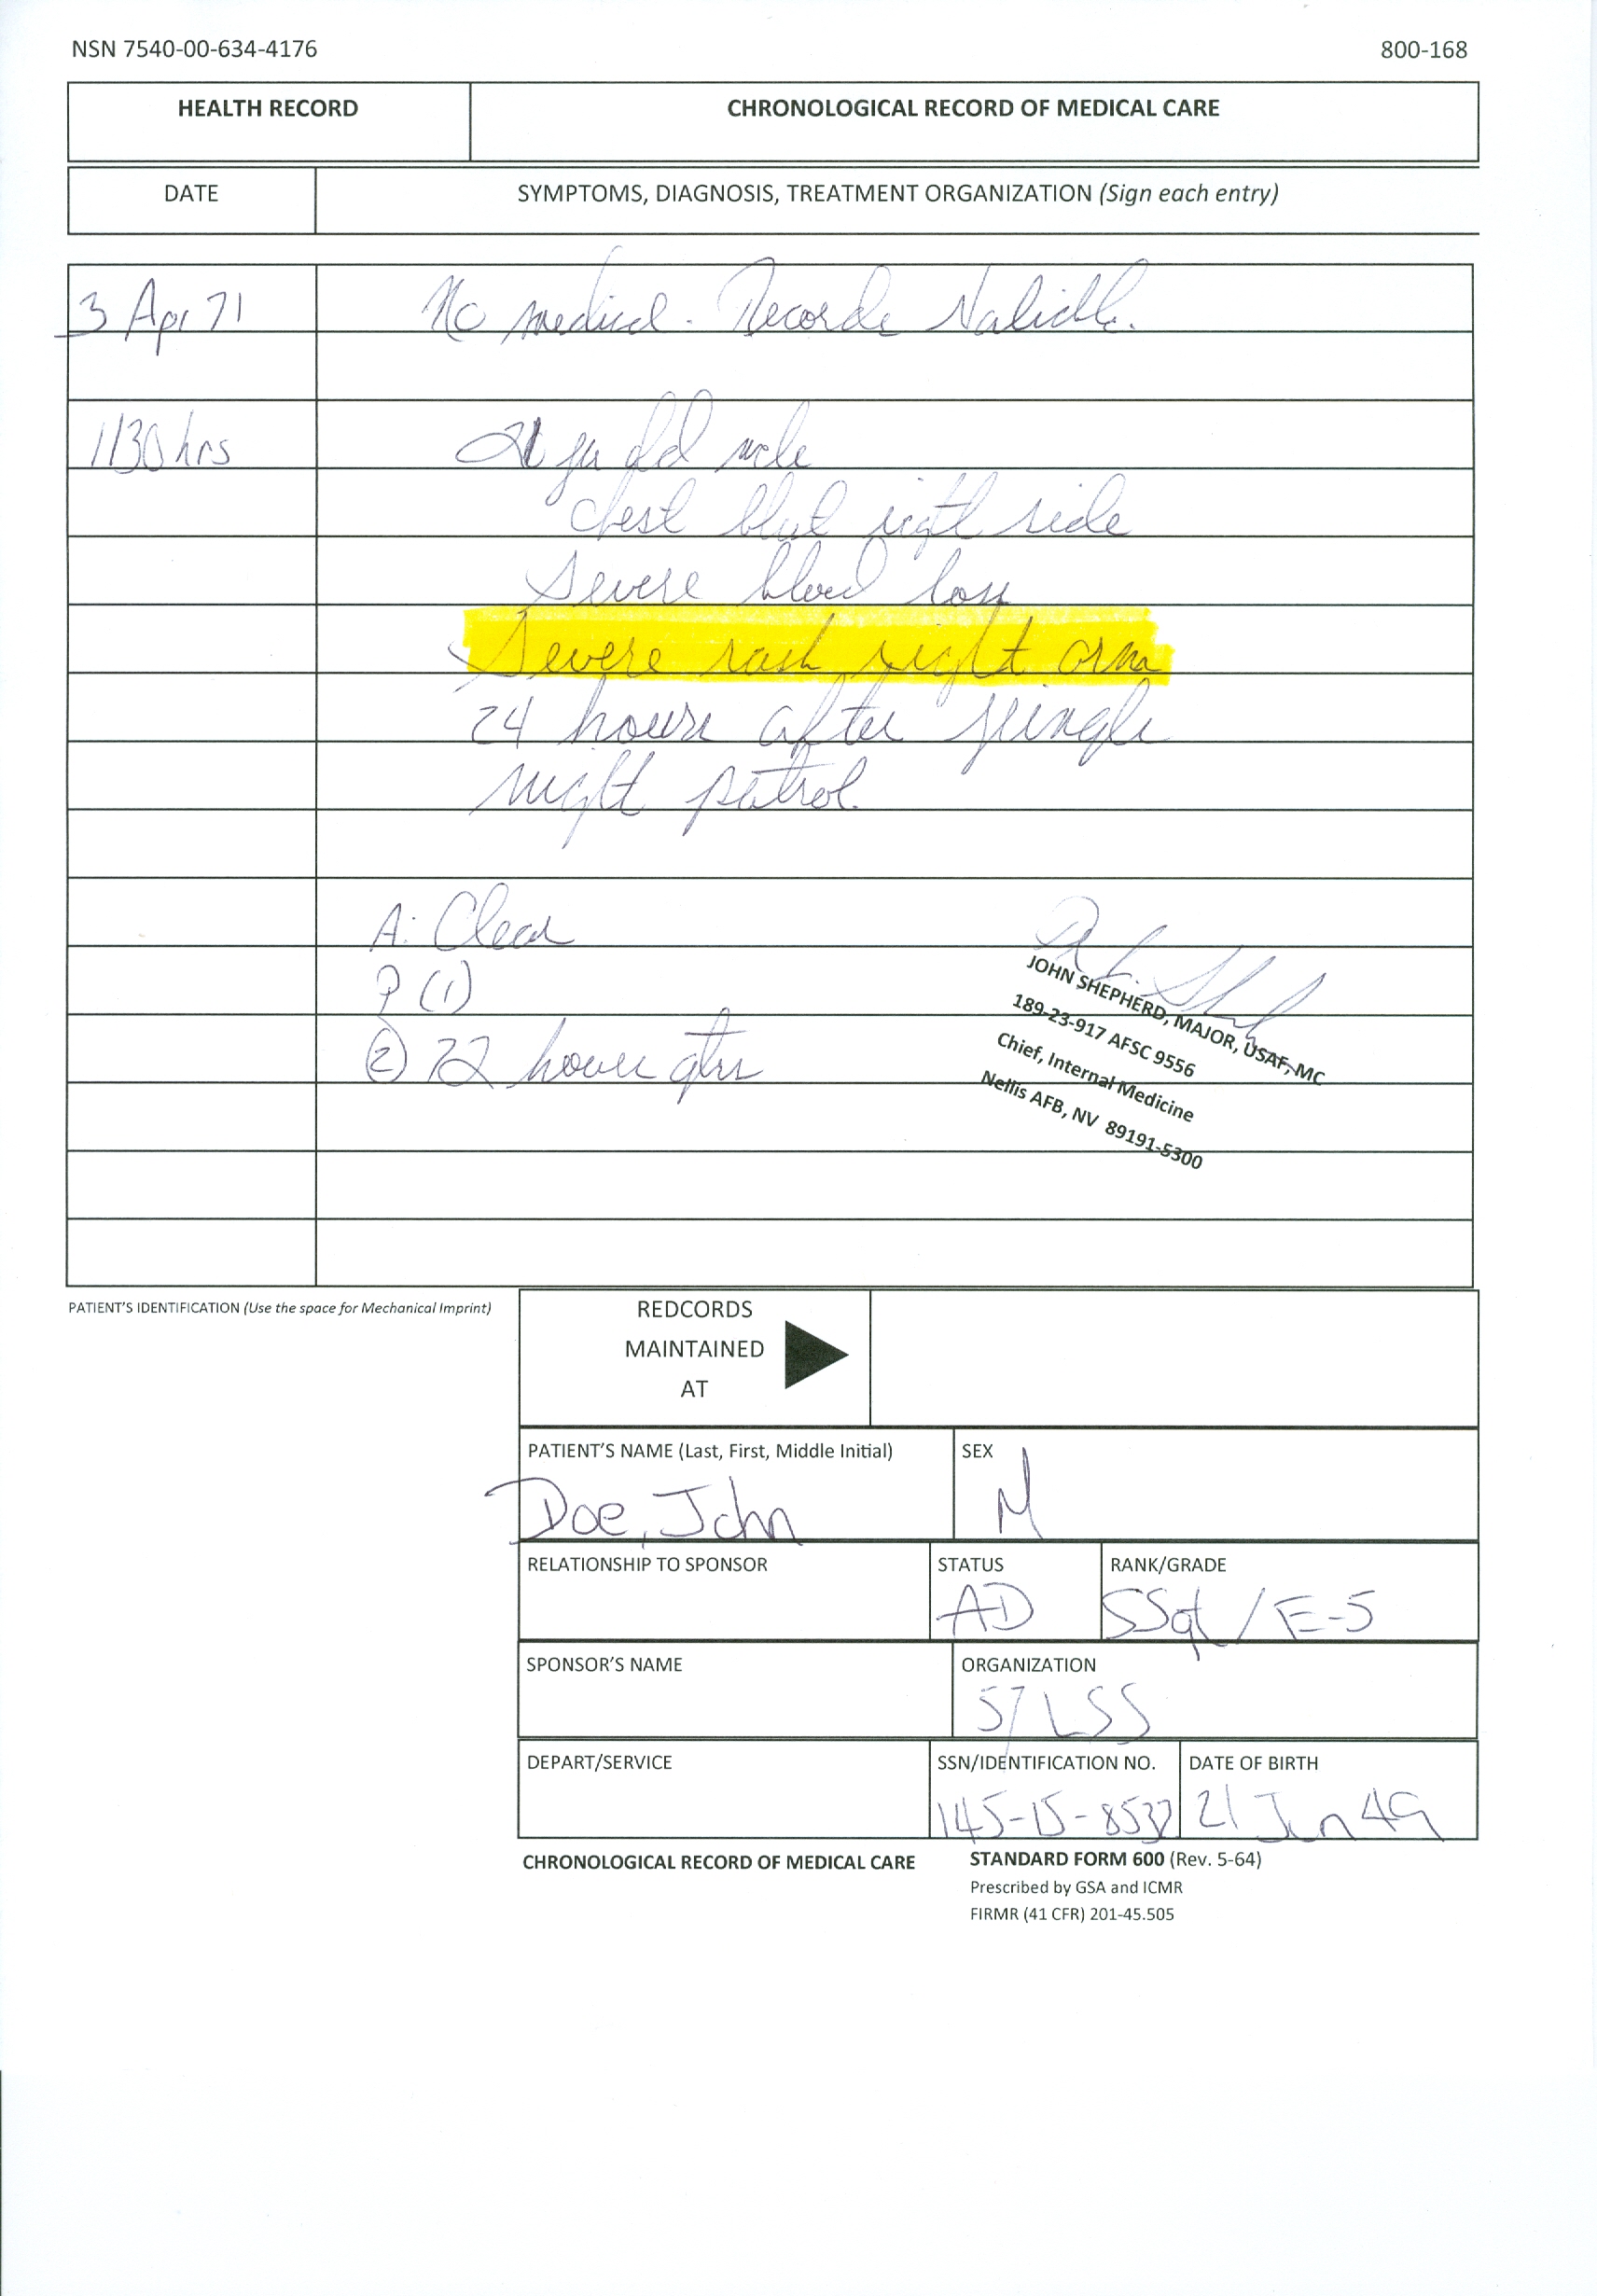 Medical Record Example